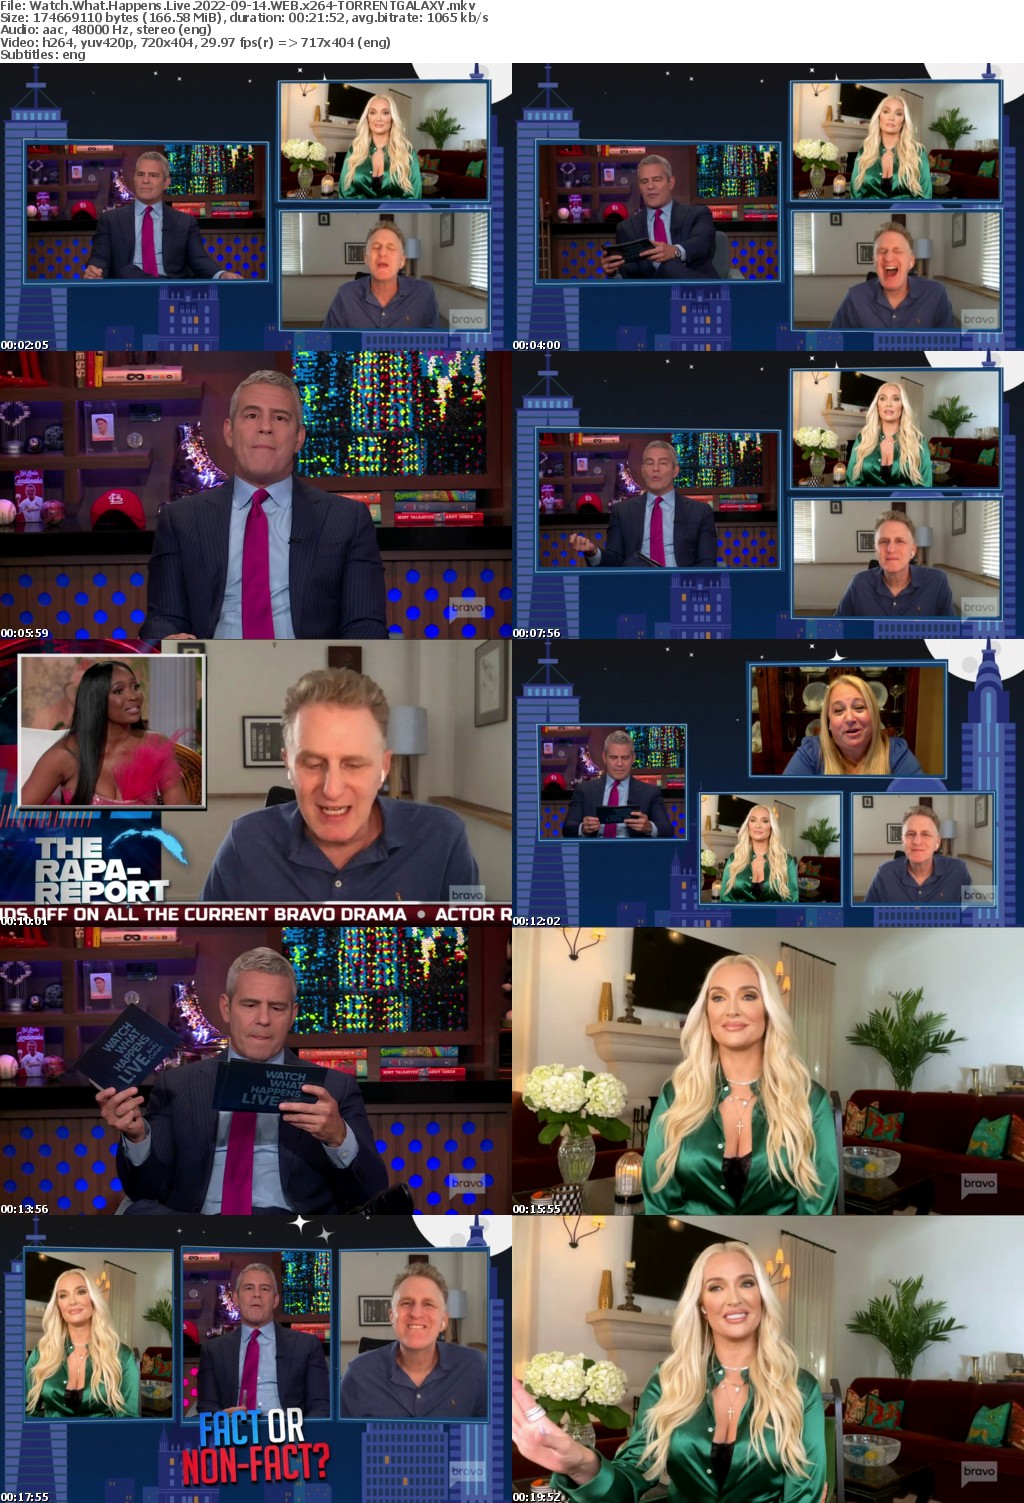 Watch What Happens Live 2022-09-14 WEB x264-GALAXY